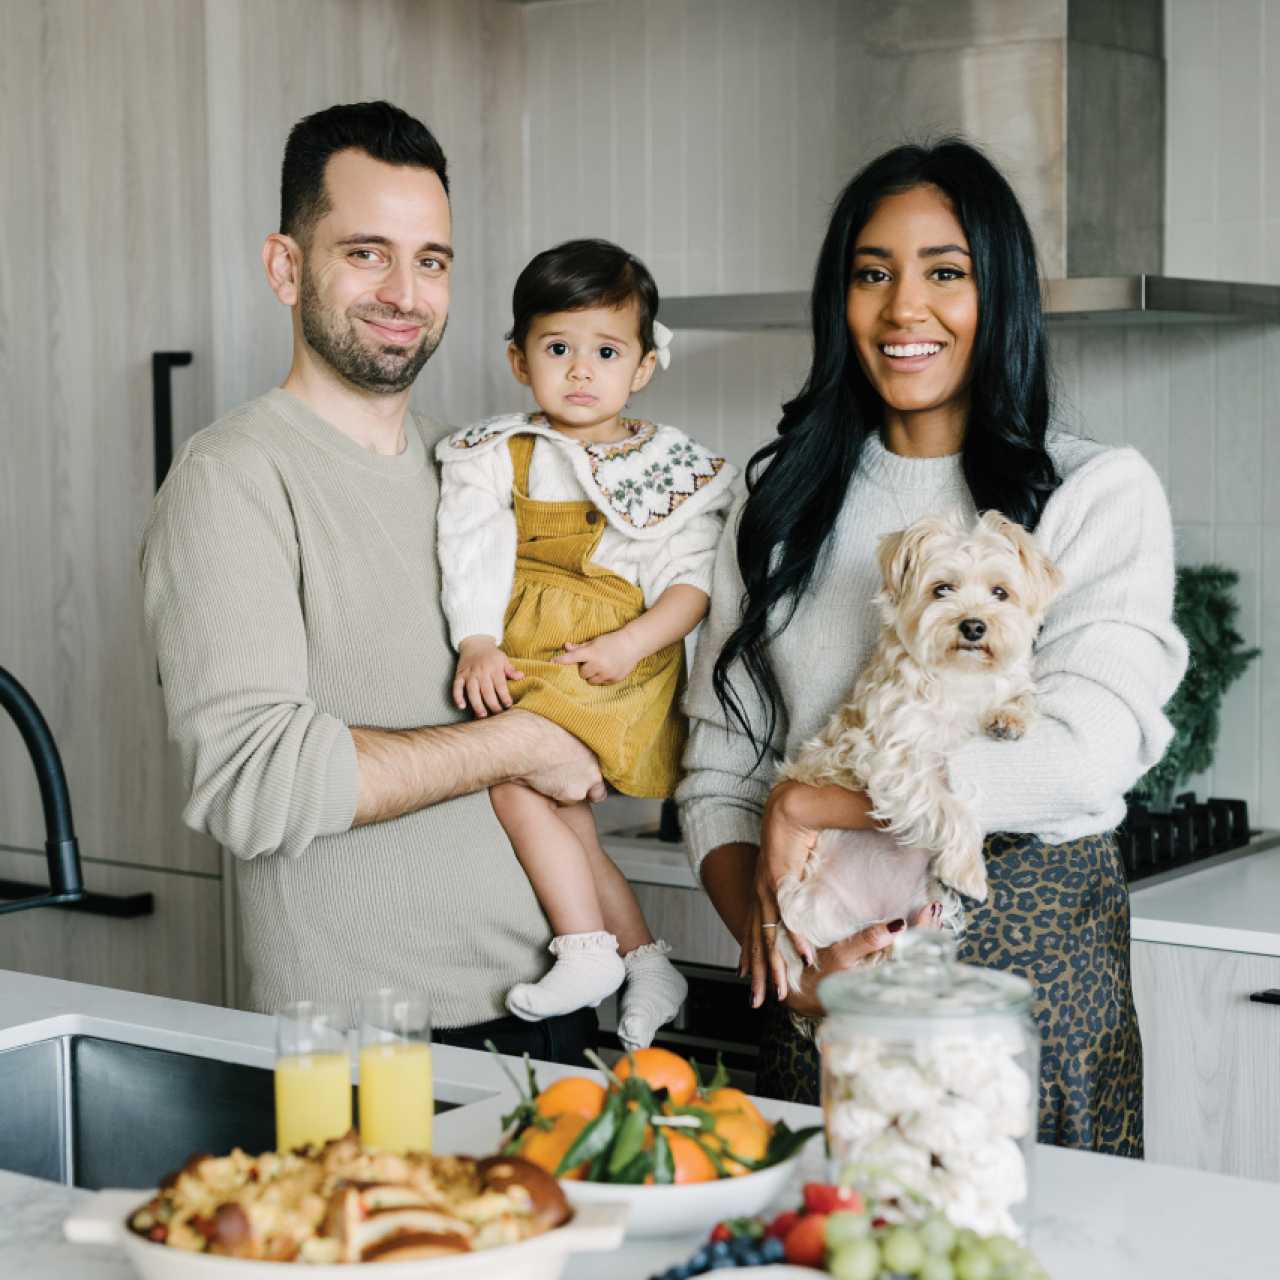 Christmas traditions from Toronto chefs | Philip Lago, Mystique Mattai and their daughter Lennox